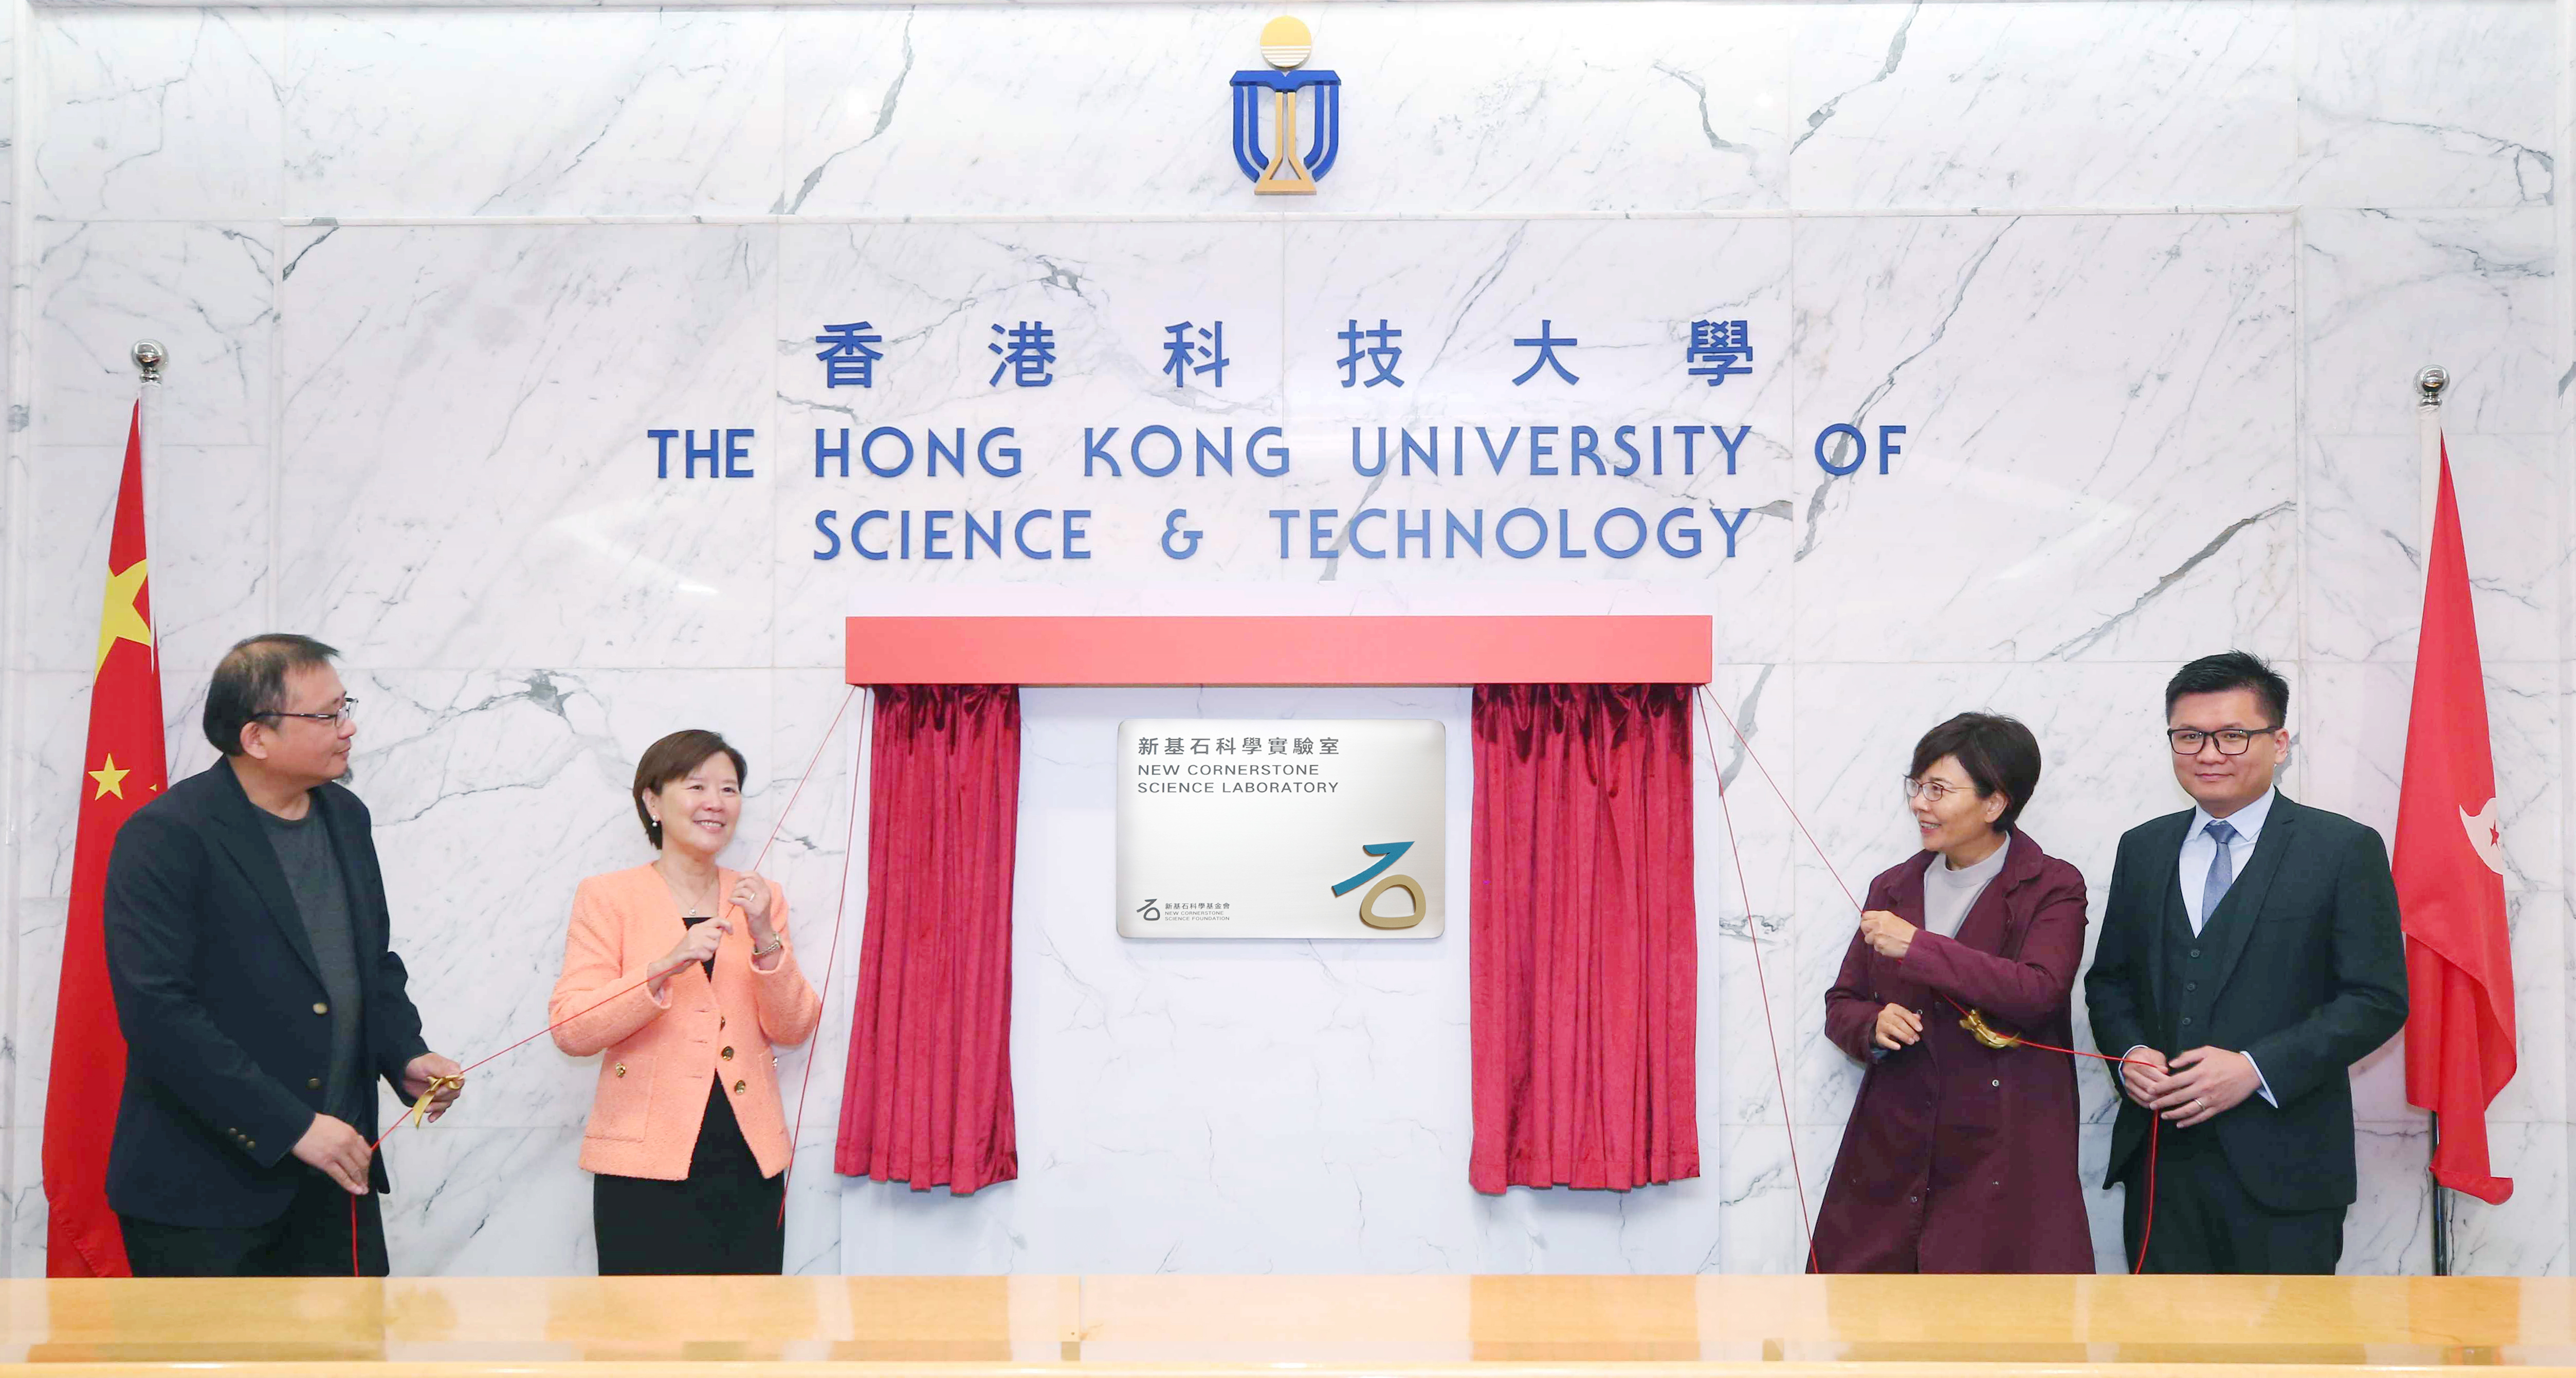 HKUST President Prof. Nancy Ip (second left), Vice Chair and Secretary of the New Cornerstone Science Foundation Ms. Rose Wang (second right), Vice President of Public Affairs of Tencent Mr. James Li Tsz-Shu (first right) and HKUST’s New Cornerstone Investigator Prof. Dai Xi (first left) unveil the plaque of HKUST’s First New Cornerstone Science Laboratory.